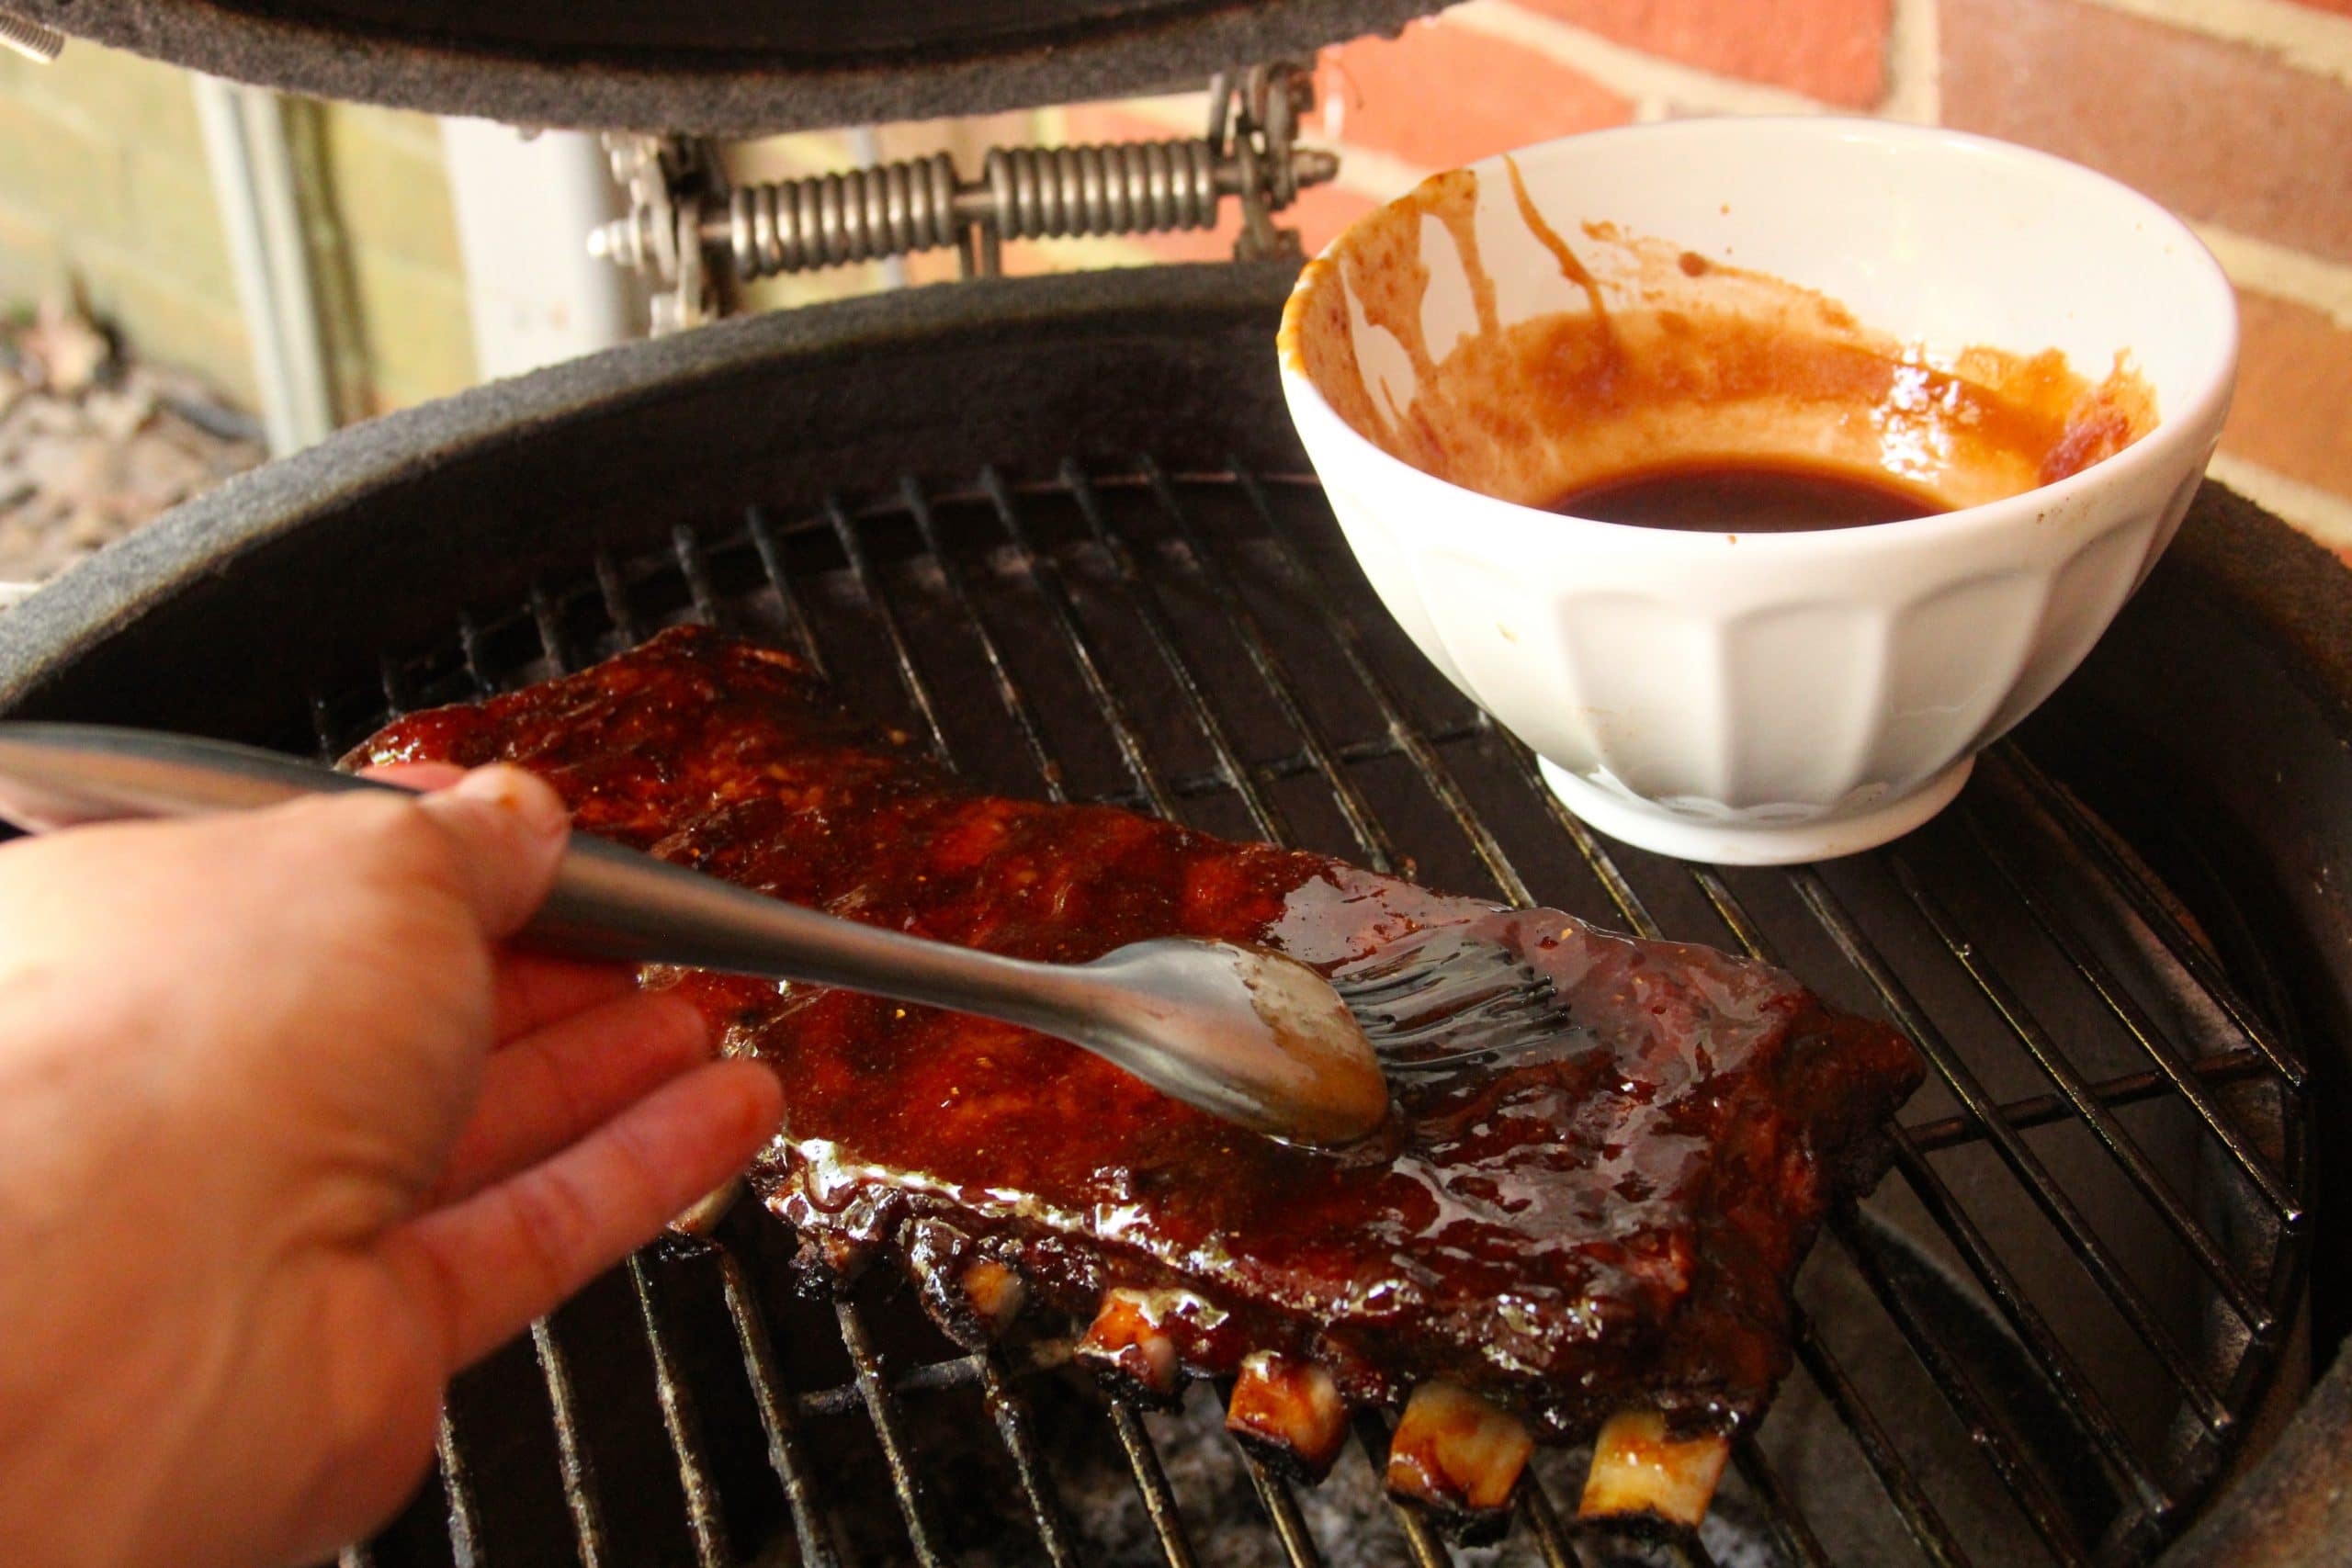 BBQ Grill Cleaner - Natural Soy Products